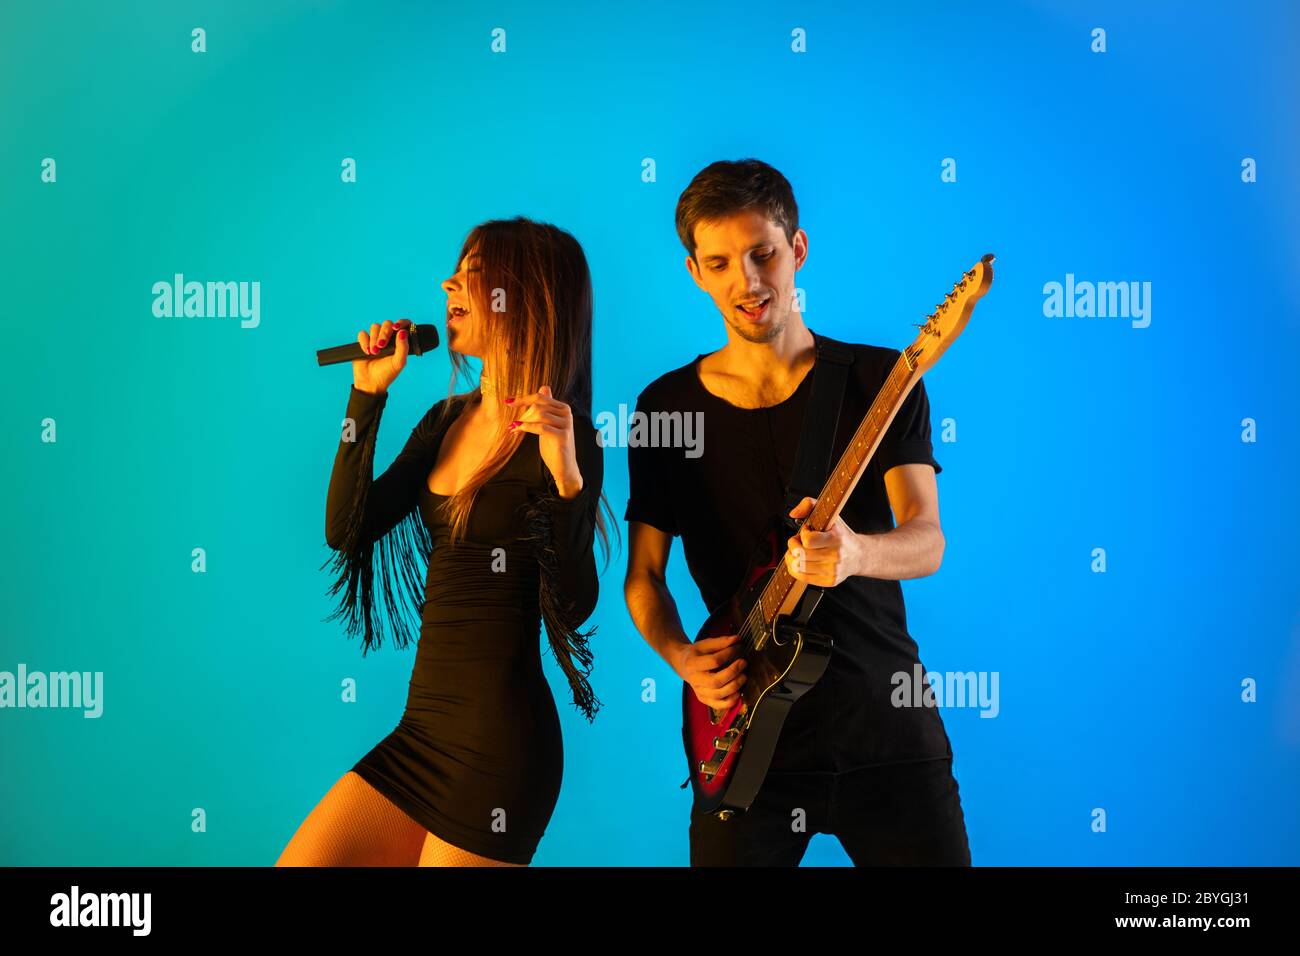 Caucasian musicians, singer and guitarist, isolated on blue studio background in neon light. Inspired improvising, performing. Concept of human emotions, facial expression, ad, music, art, festival. Stock Photo